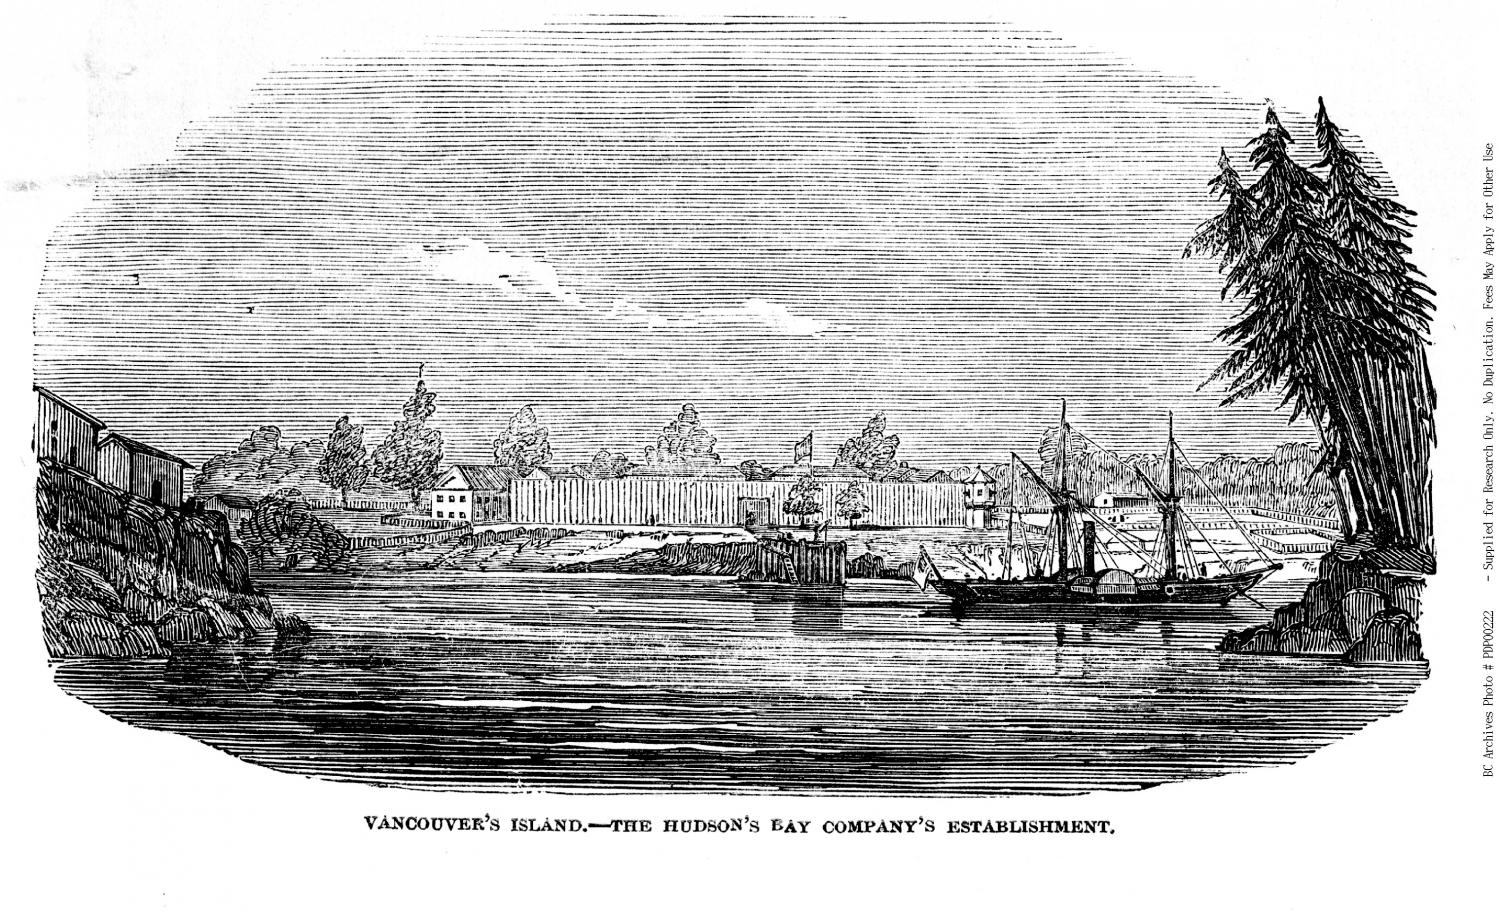 Illustrated London News engraving of “Vancouver Island” from 1848.